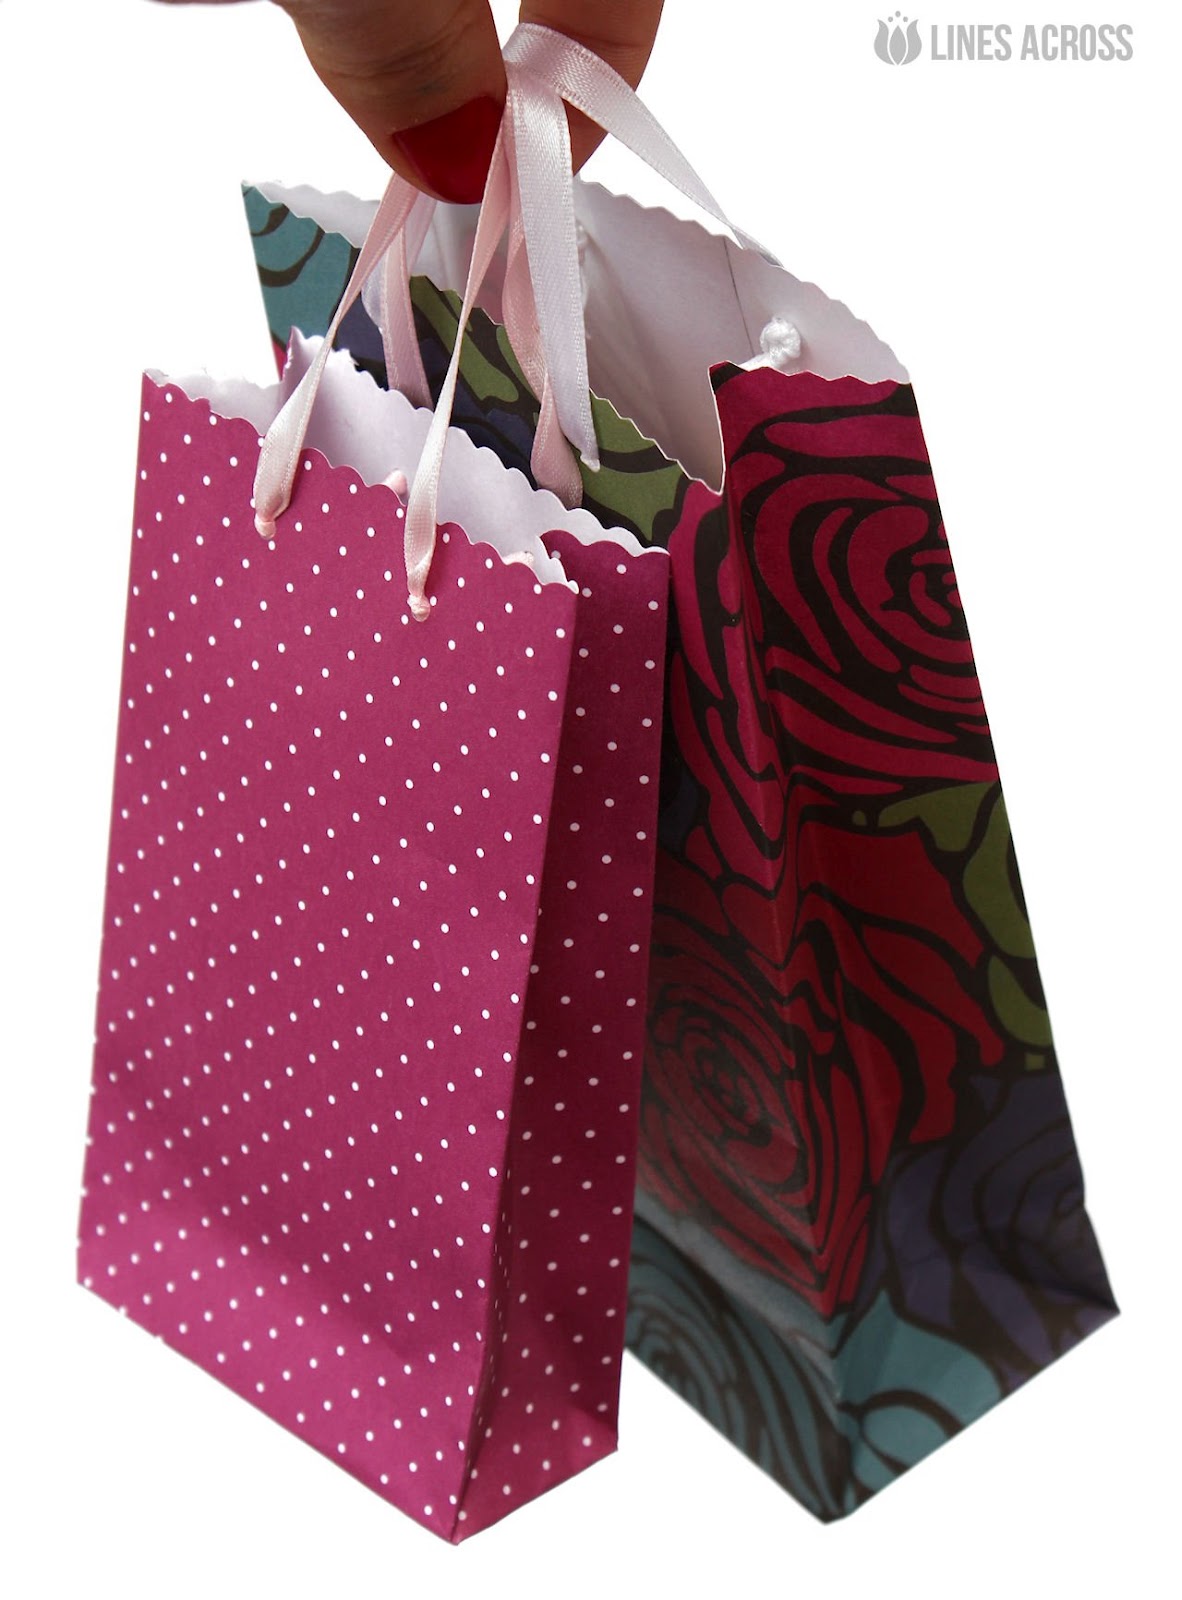 Paper Gift Bag Tutorial with Lines Across - Inspiration Made Simple